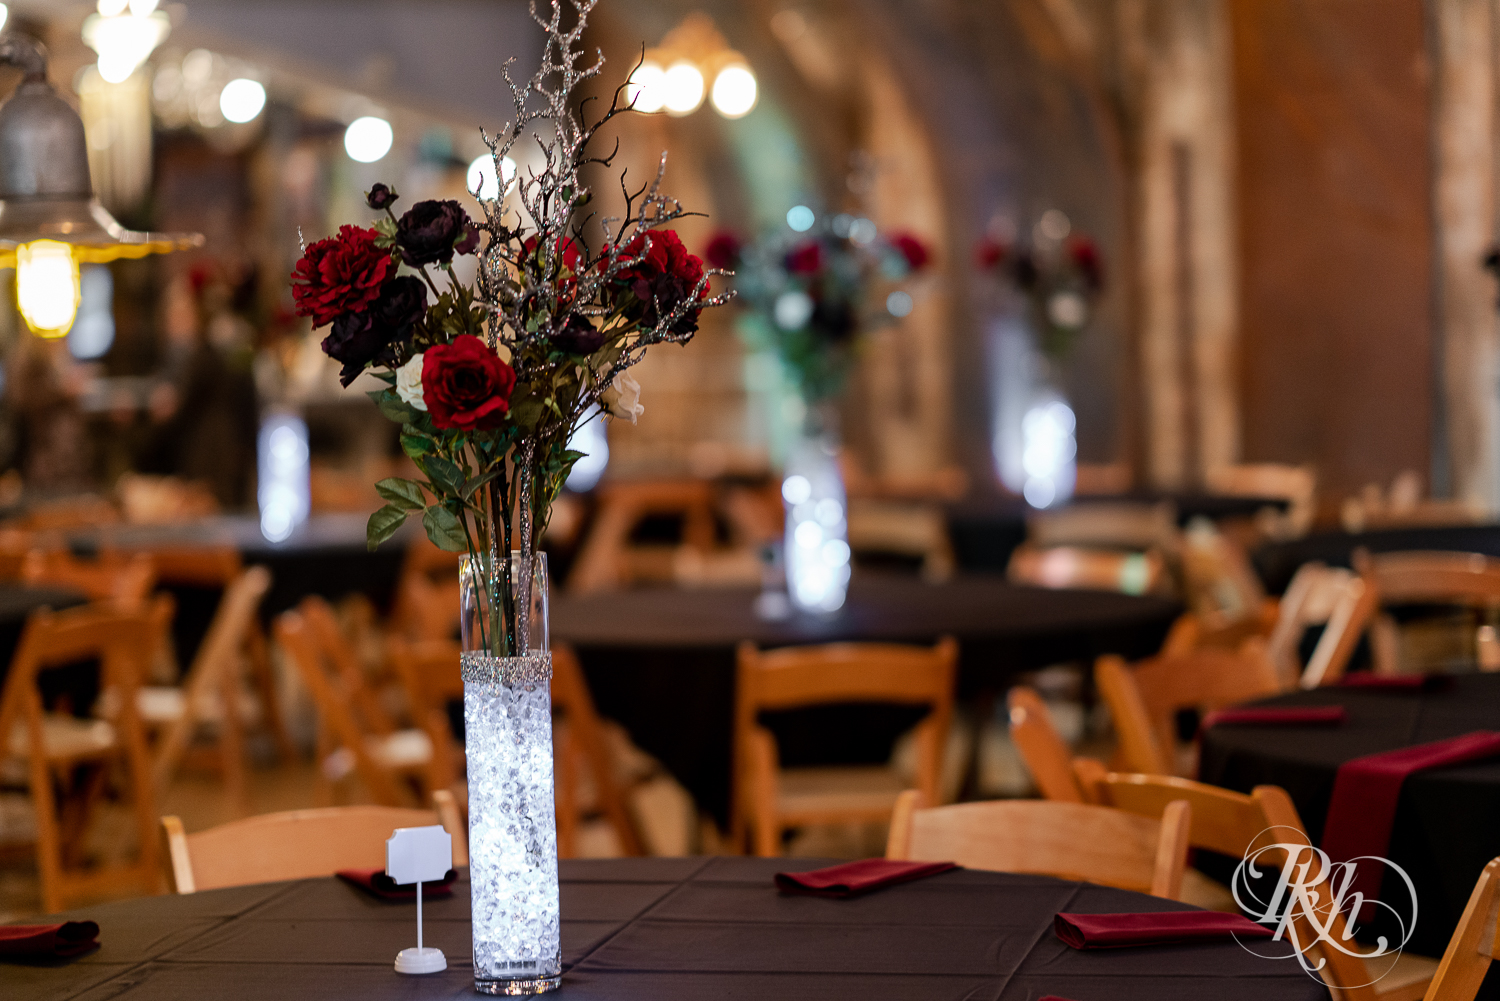 Wedding reception with red roses setup at Warehouse Winery in Saint Louis Park, Minnesota.